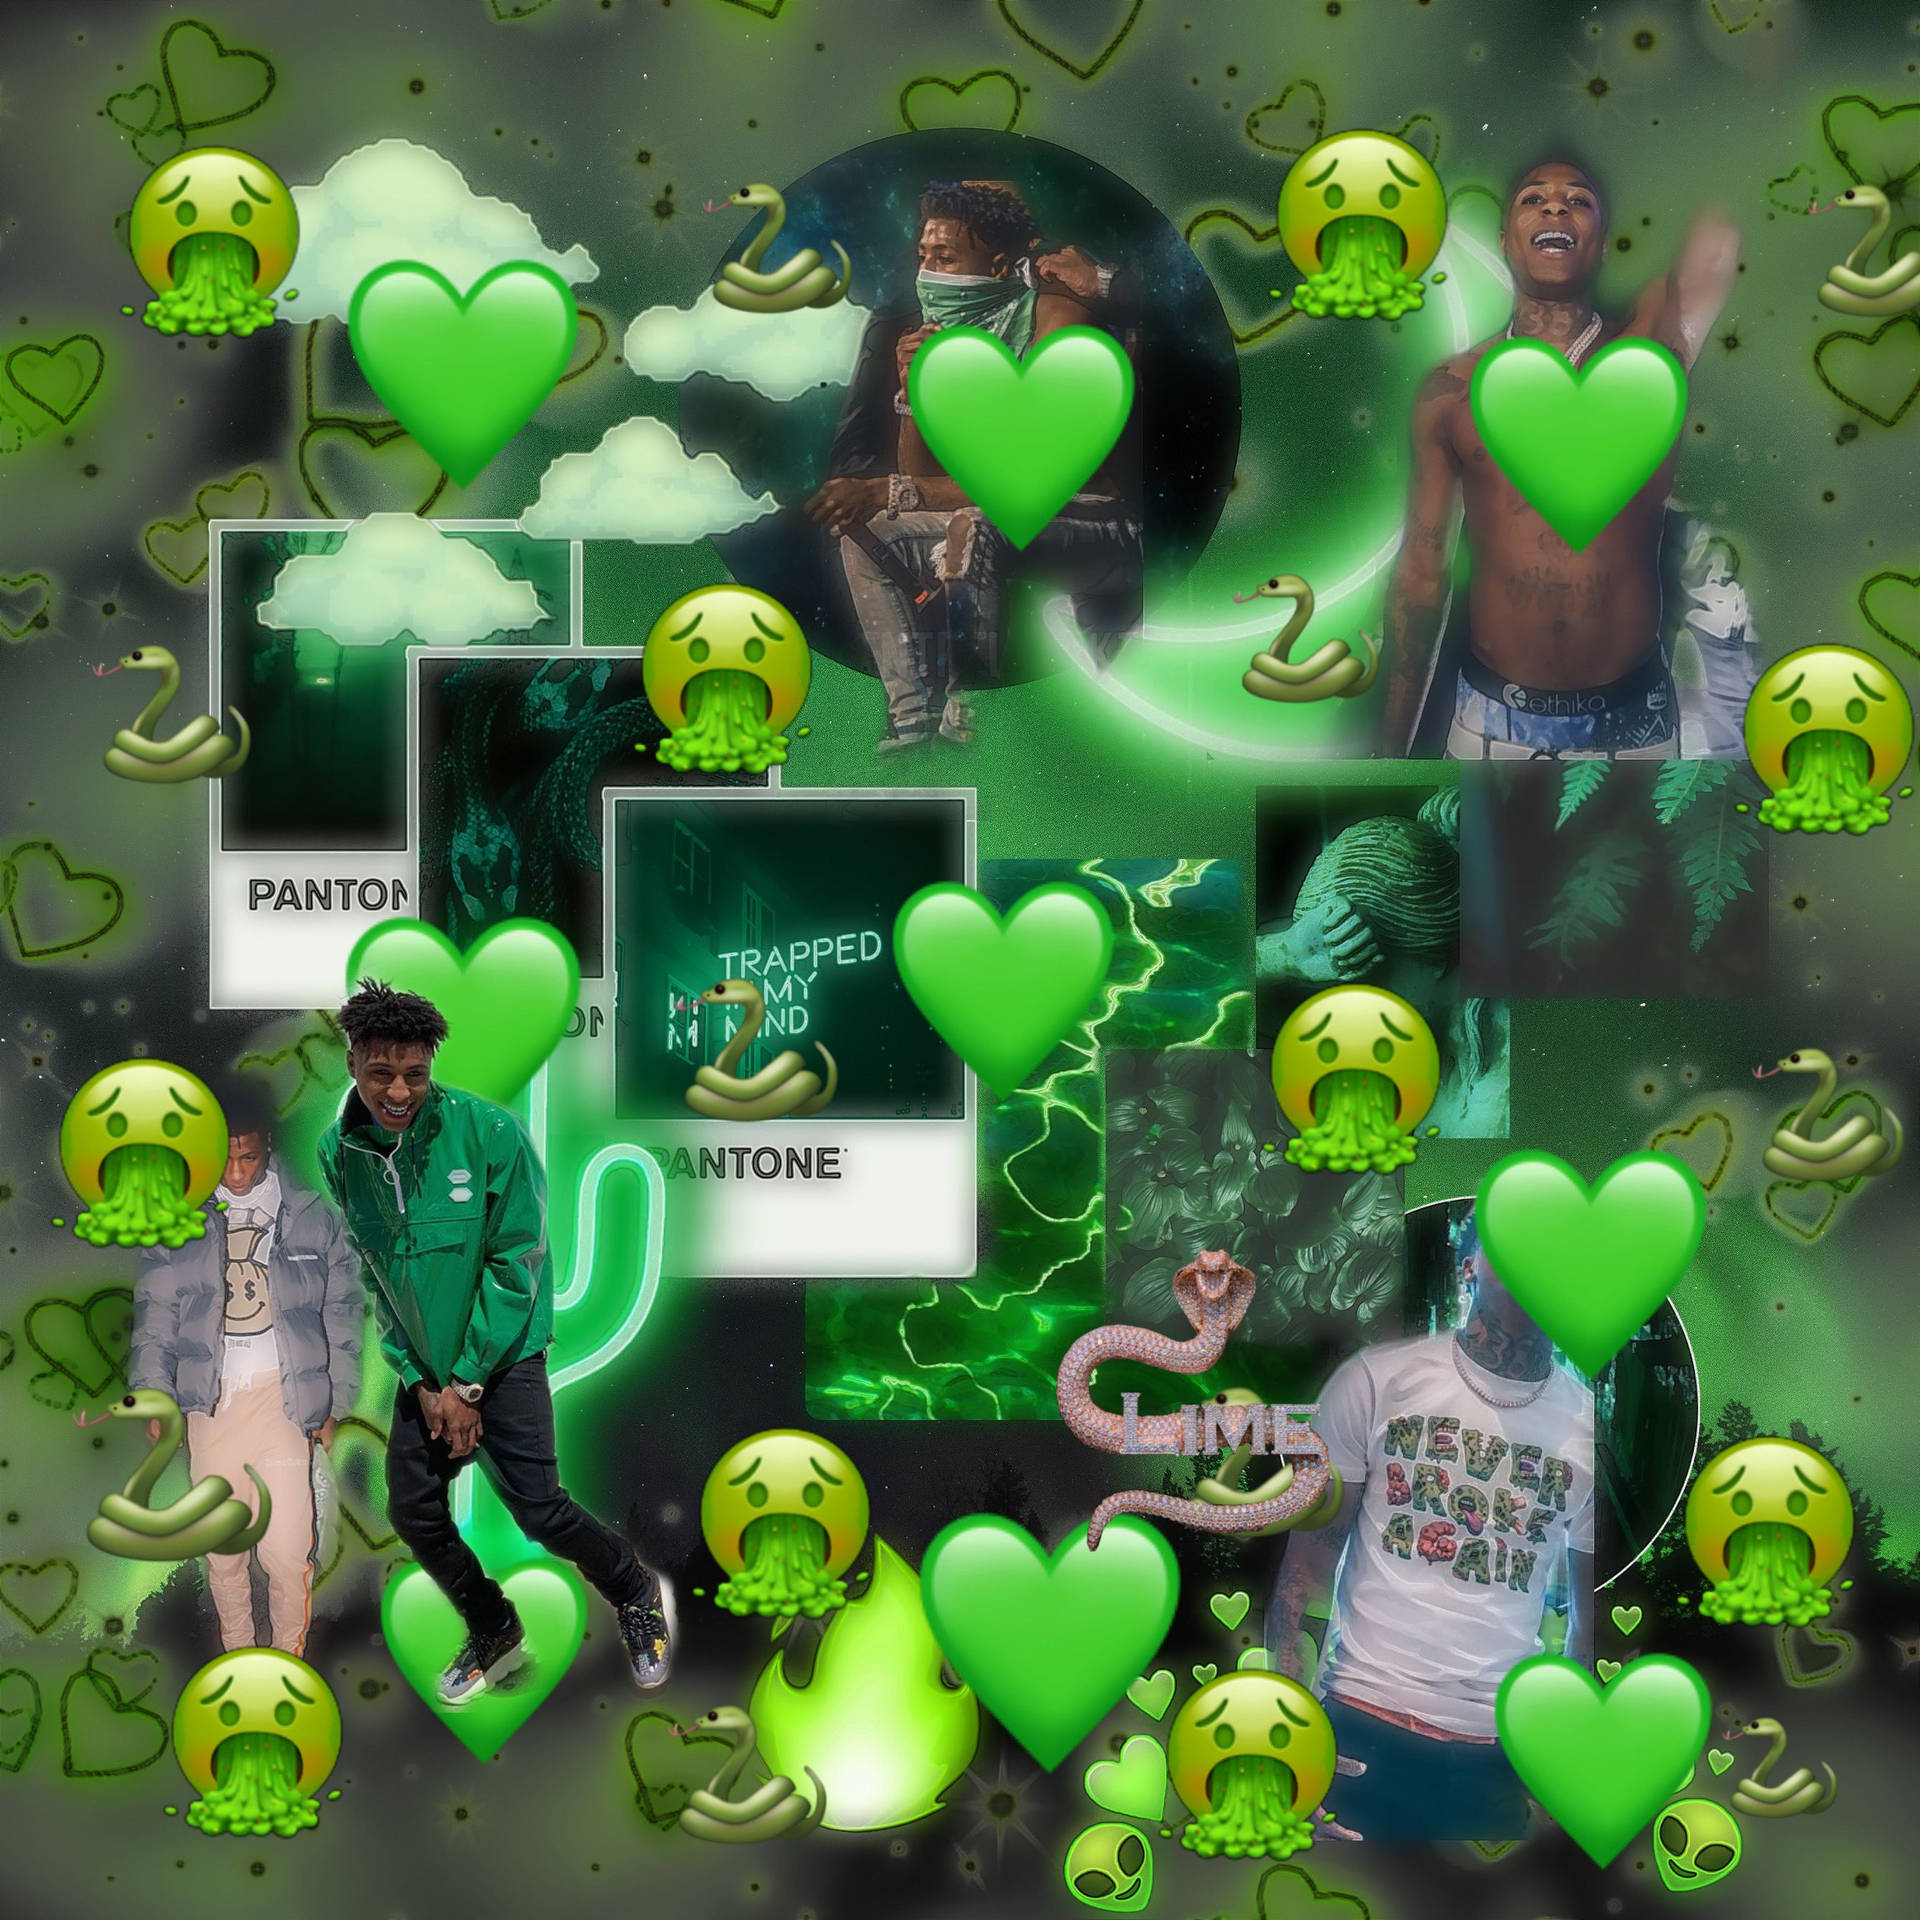 Download A Collage Of Green Hearts And Other Images Wallpaper  Wallpapers com